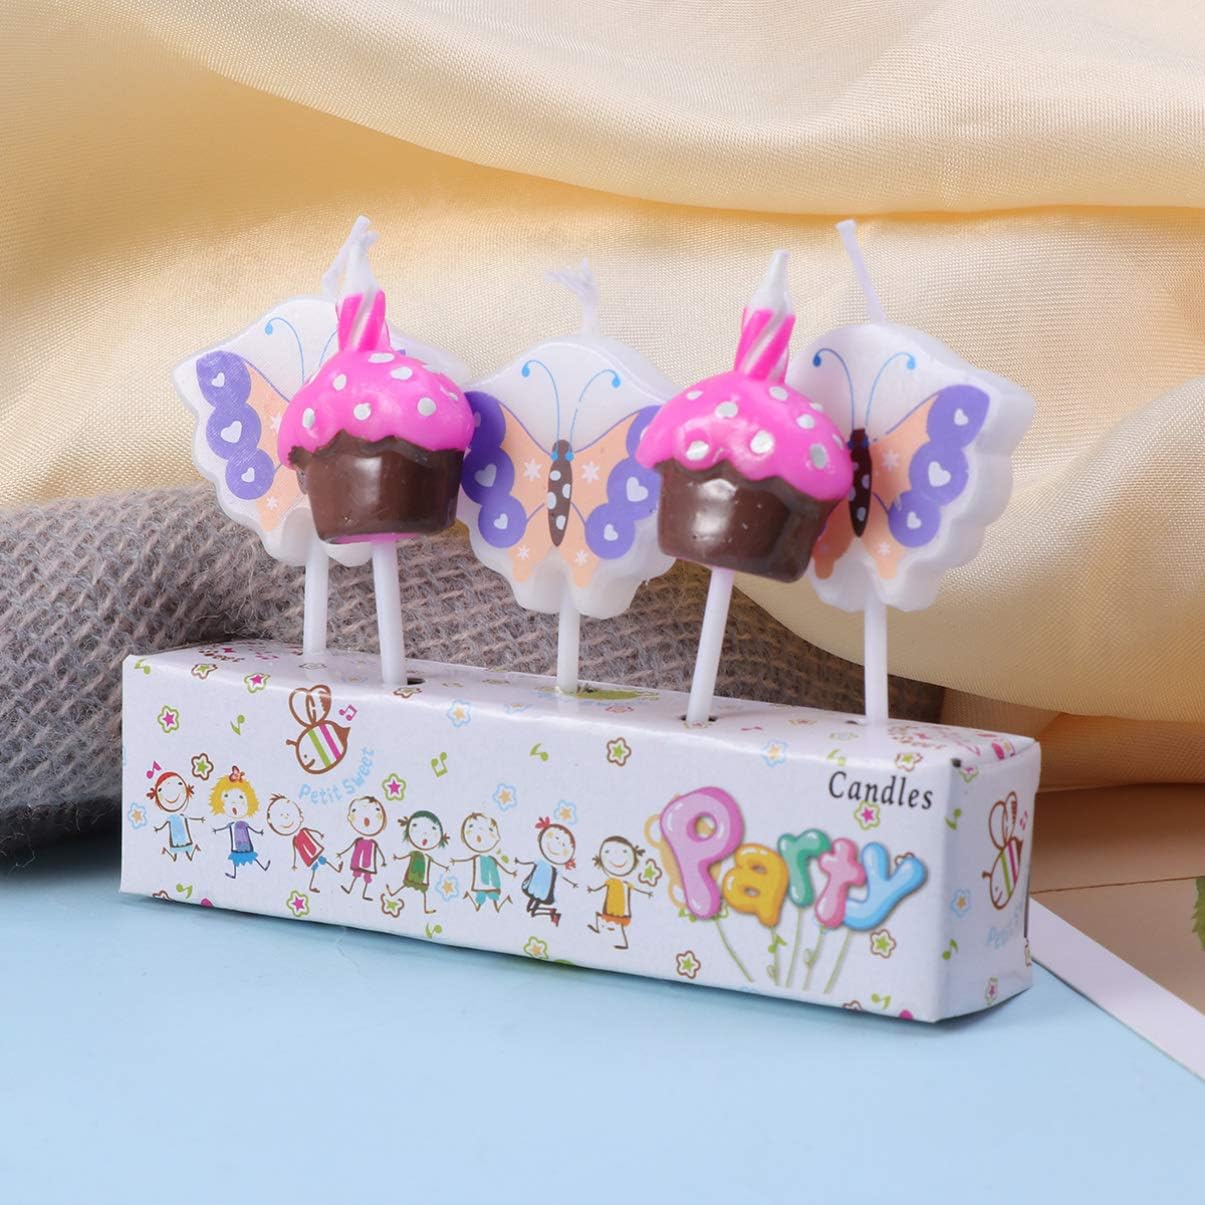 Butterfly and Cupcake Themed Candles